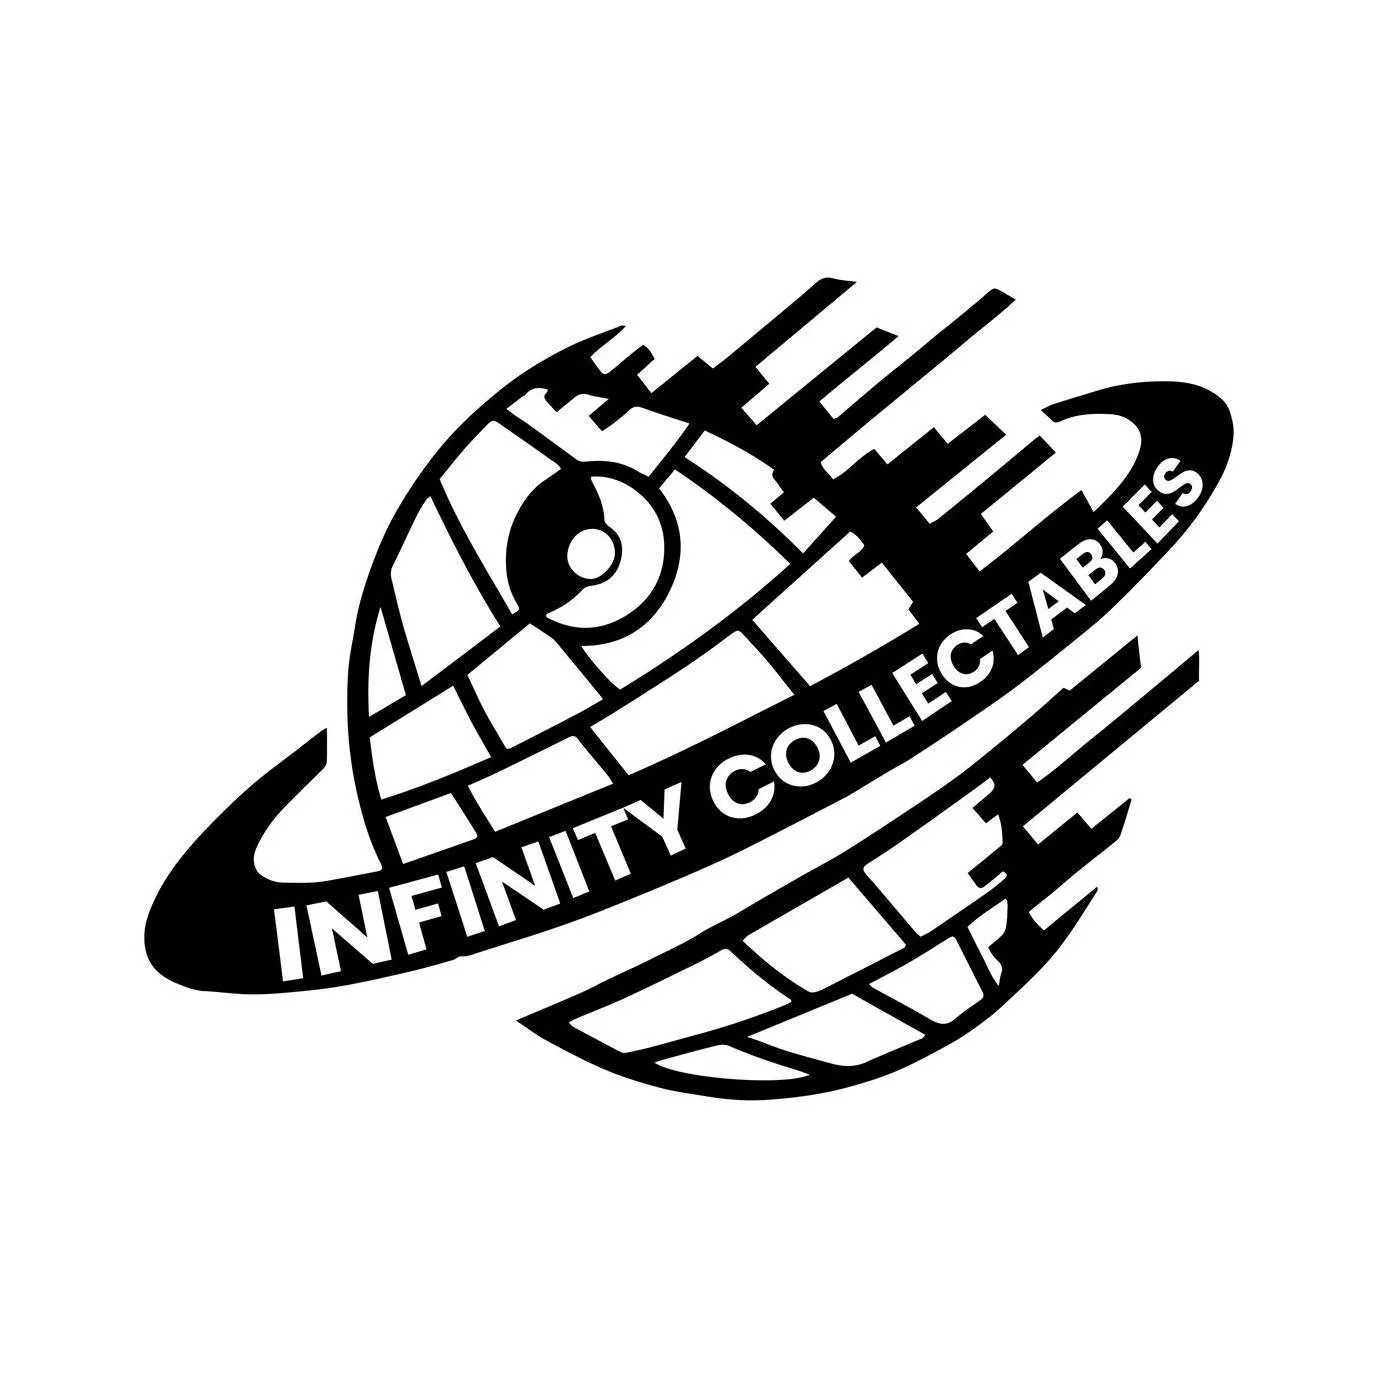 infinitycollectables.com